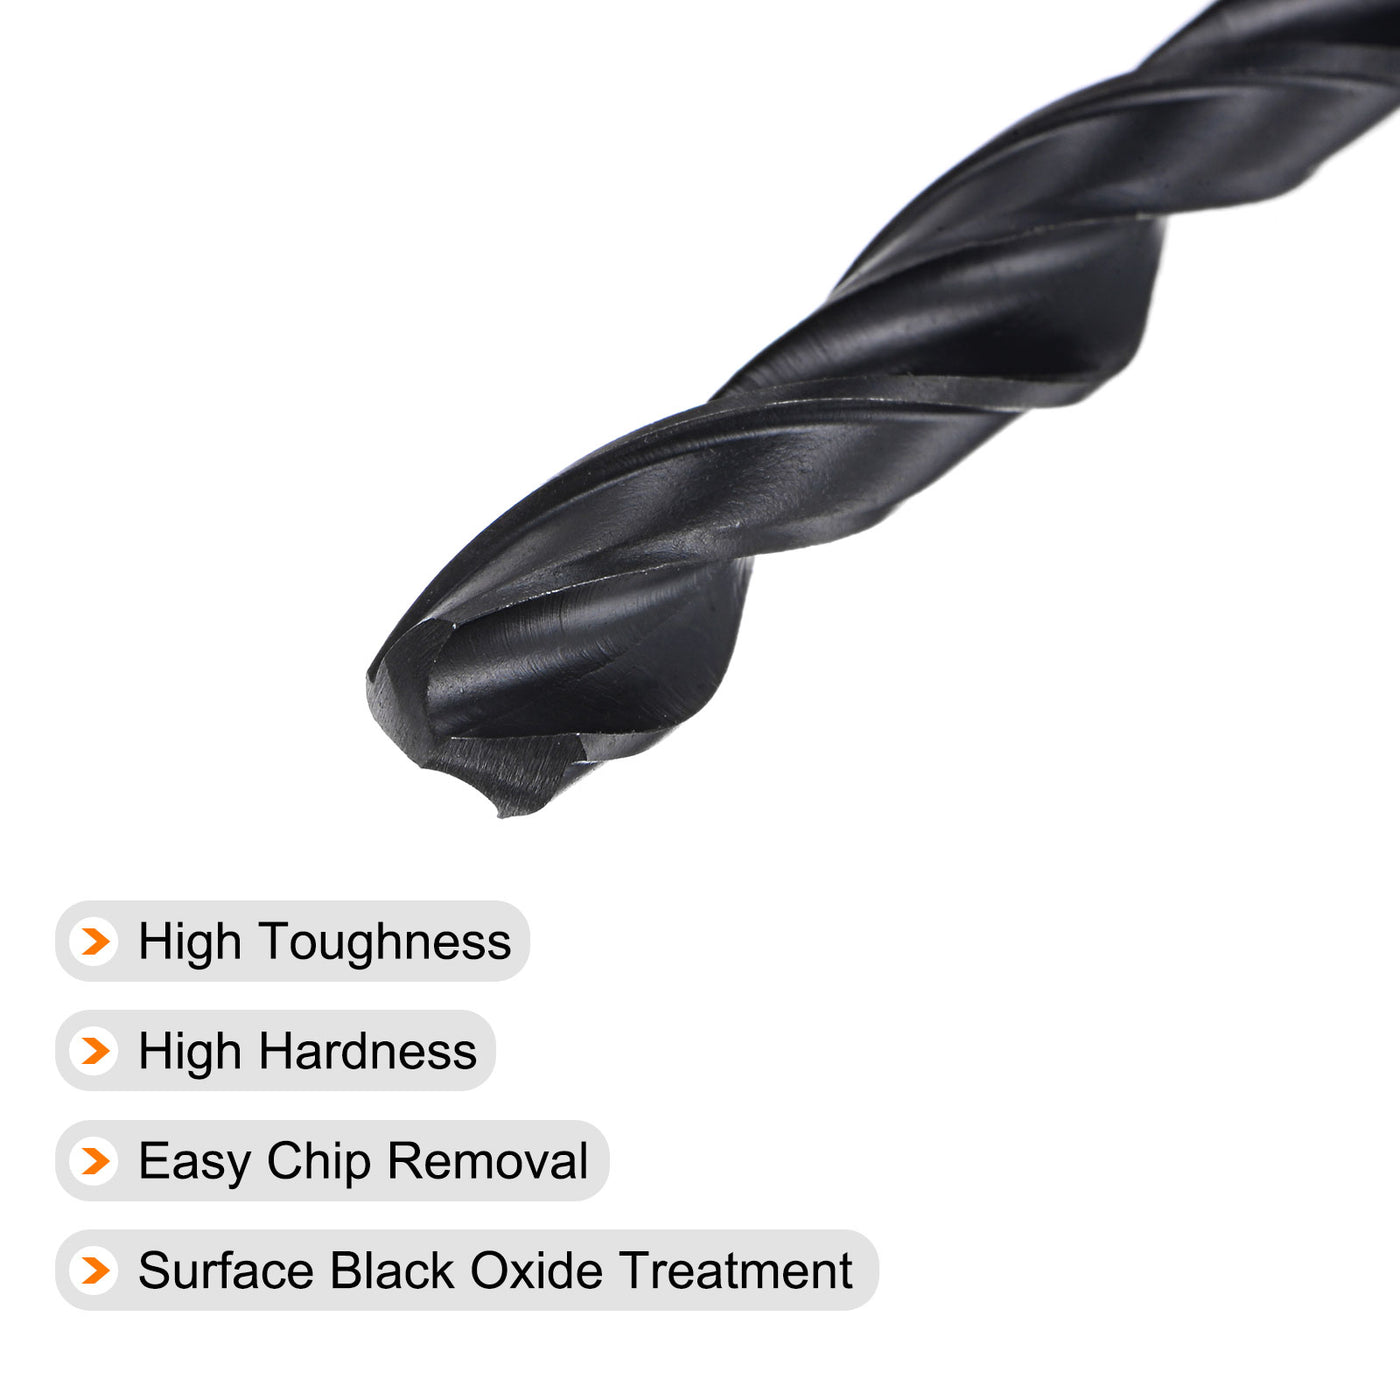 uxcell Uxcell High Speed Steel Twist Drill Bit, 8.4mm Fully Ground Black Oxide 115mm Long 4Pcs